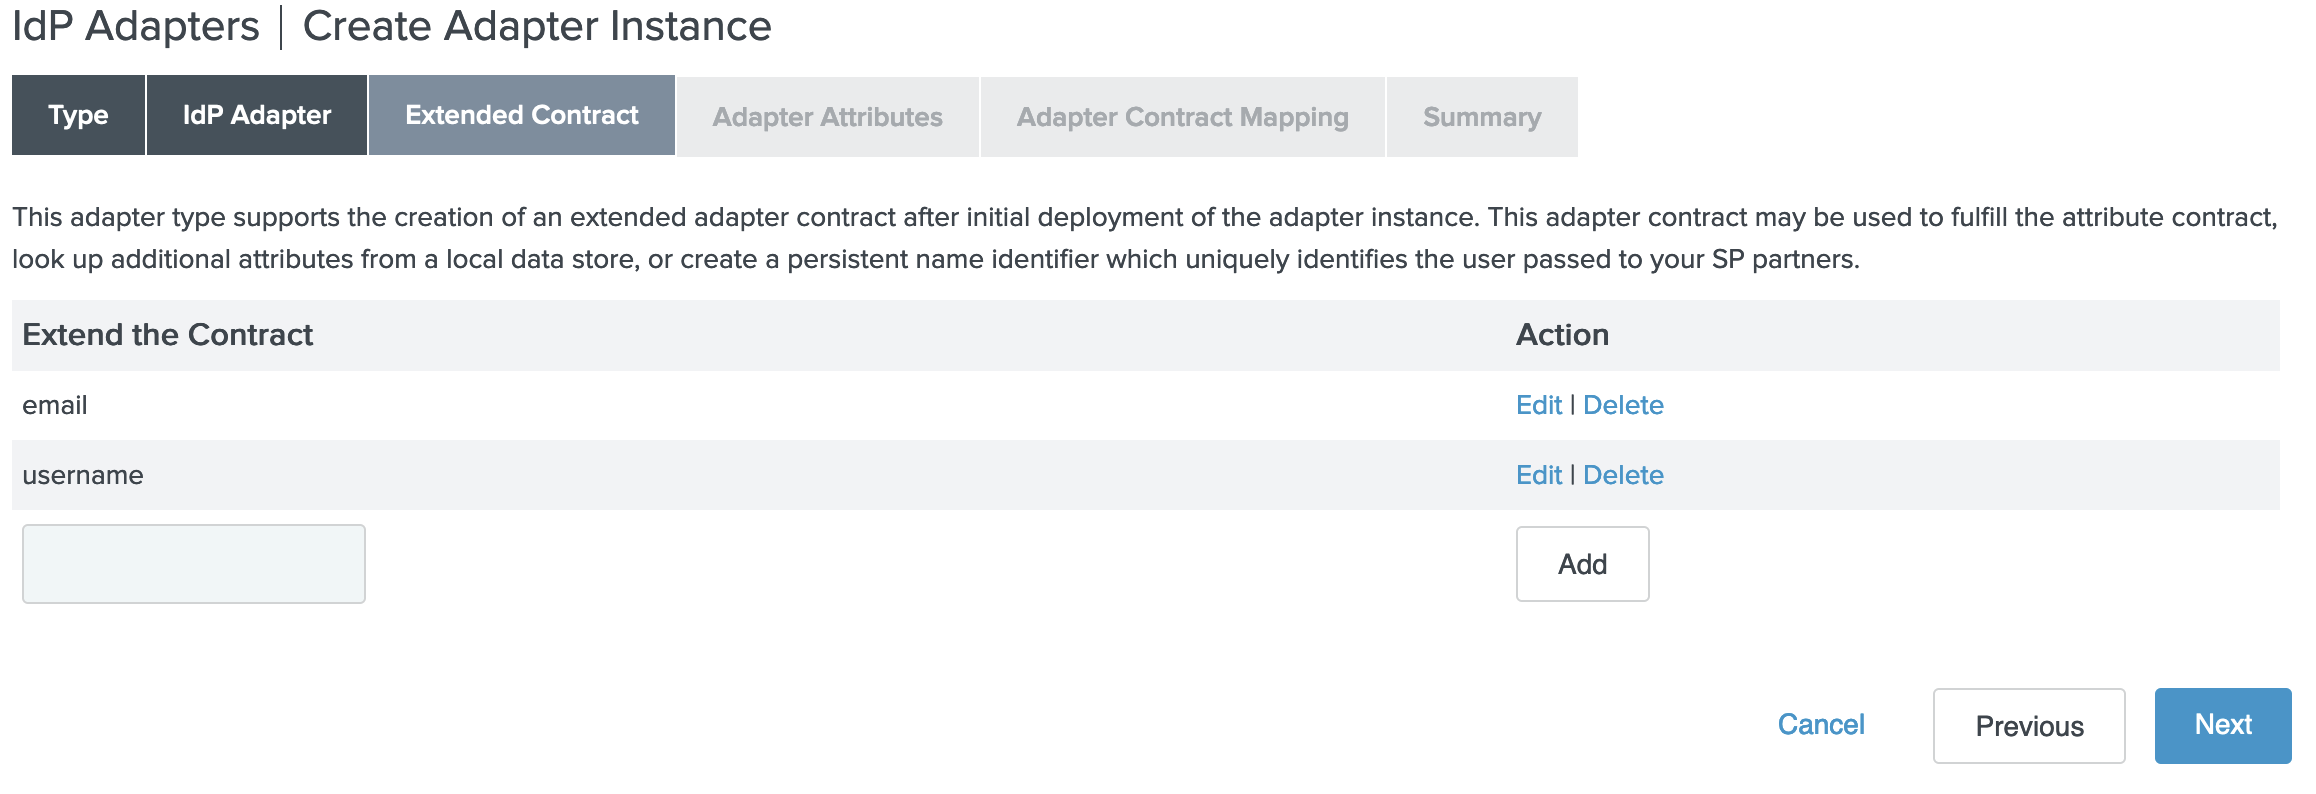 IdP Adapters | Create Adapter Instance - Extended Contract